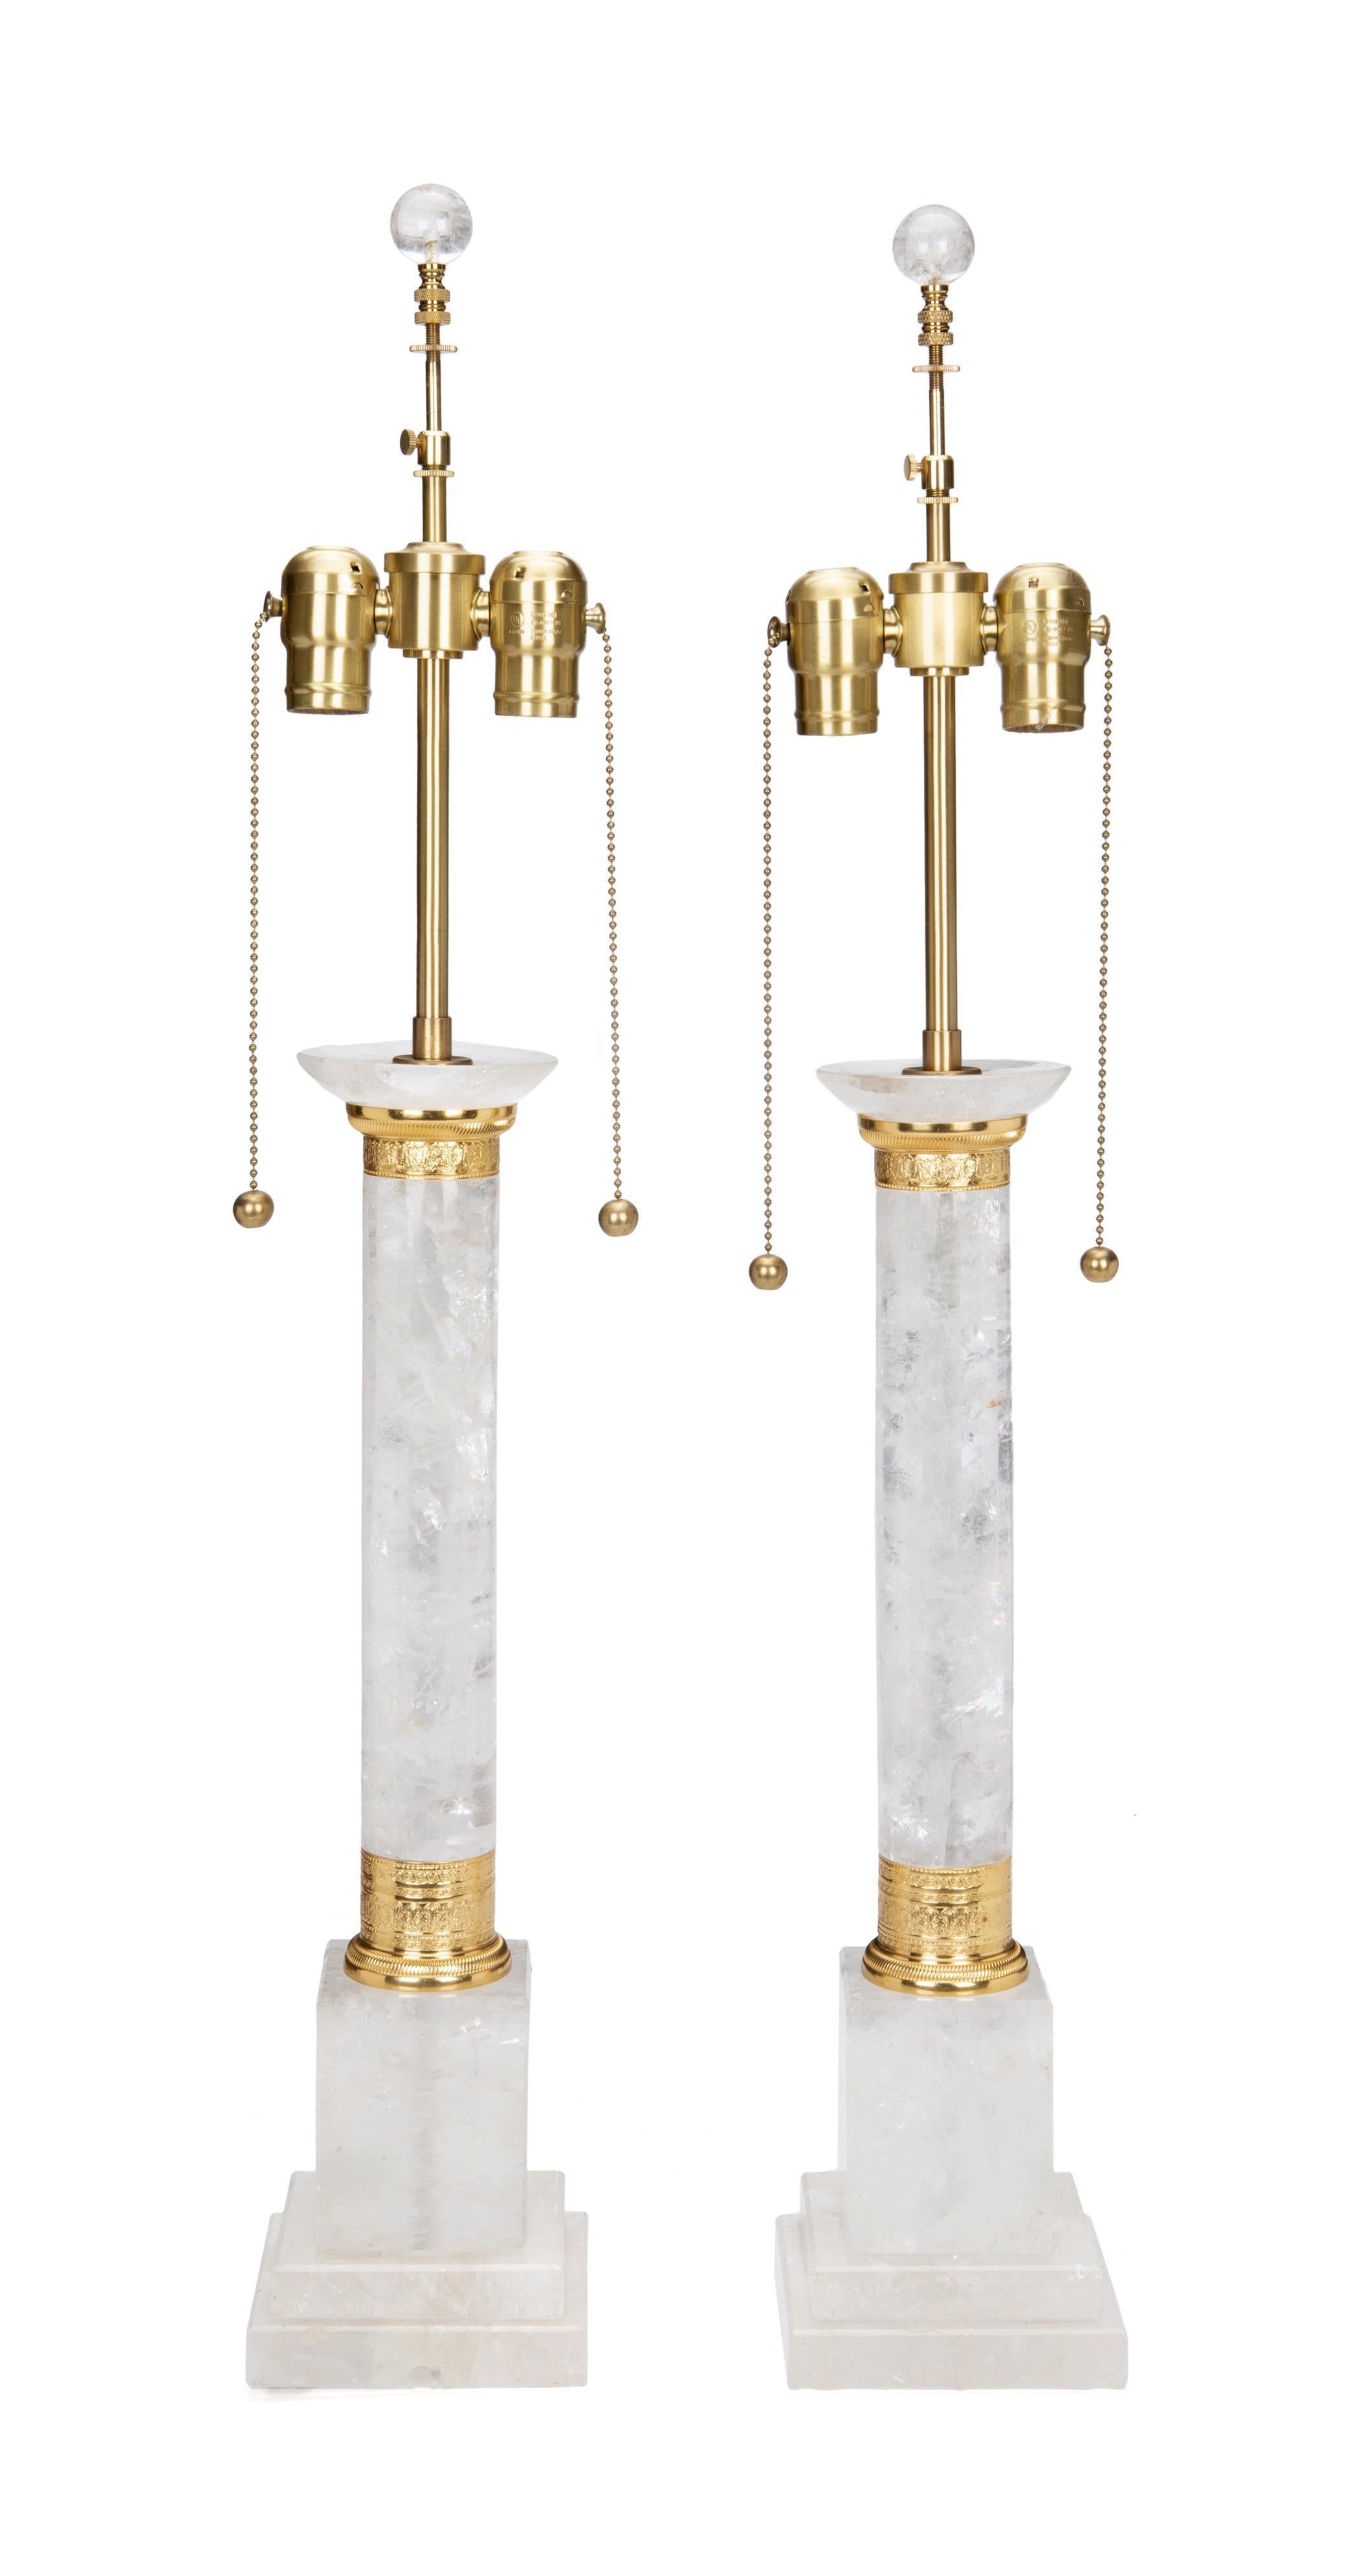 Pair of Neoclassical Style Rock Crystal and Ormolu Lamps In Excellent Condition For Sale In Cypress, CA